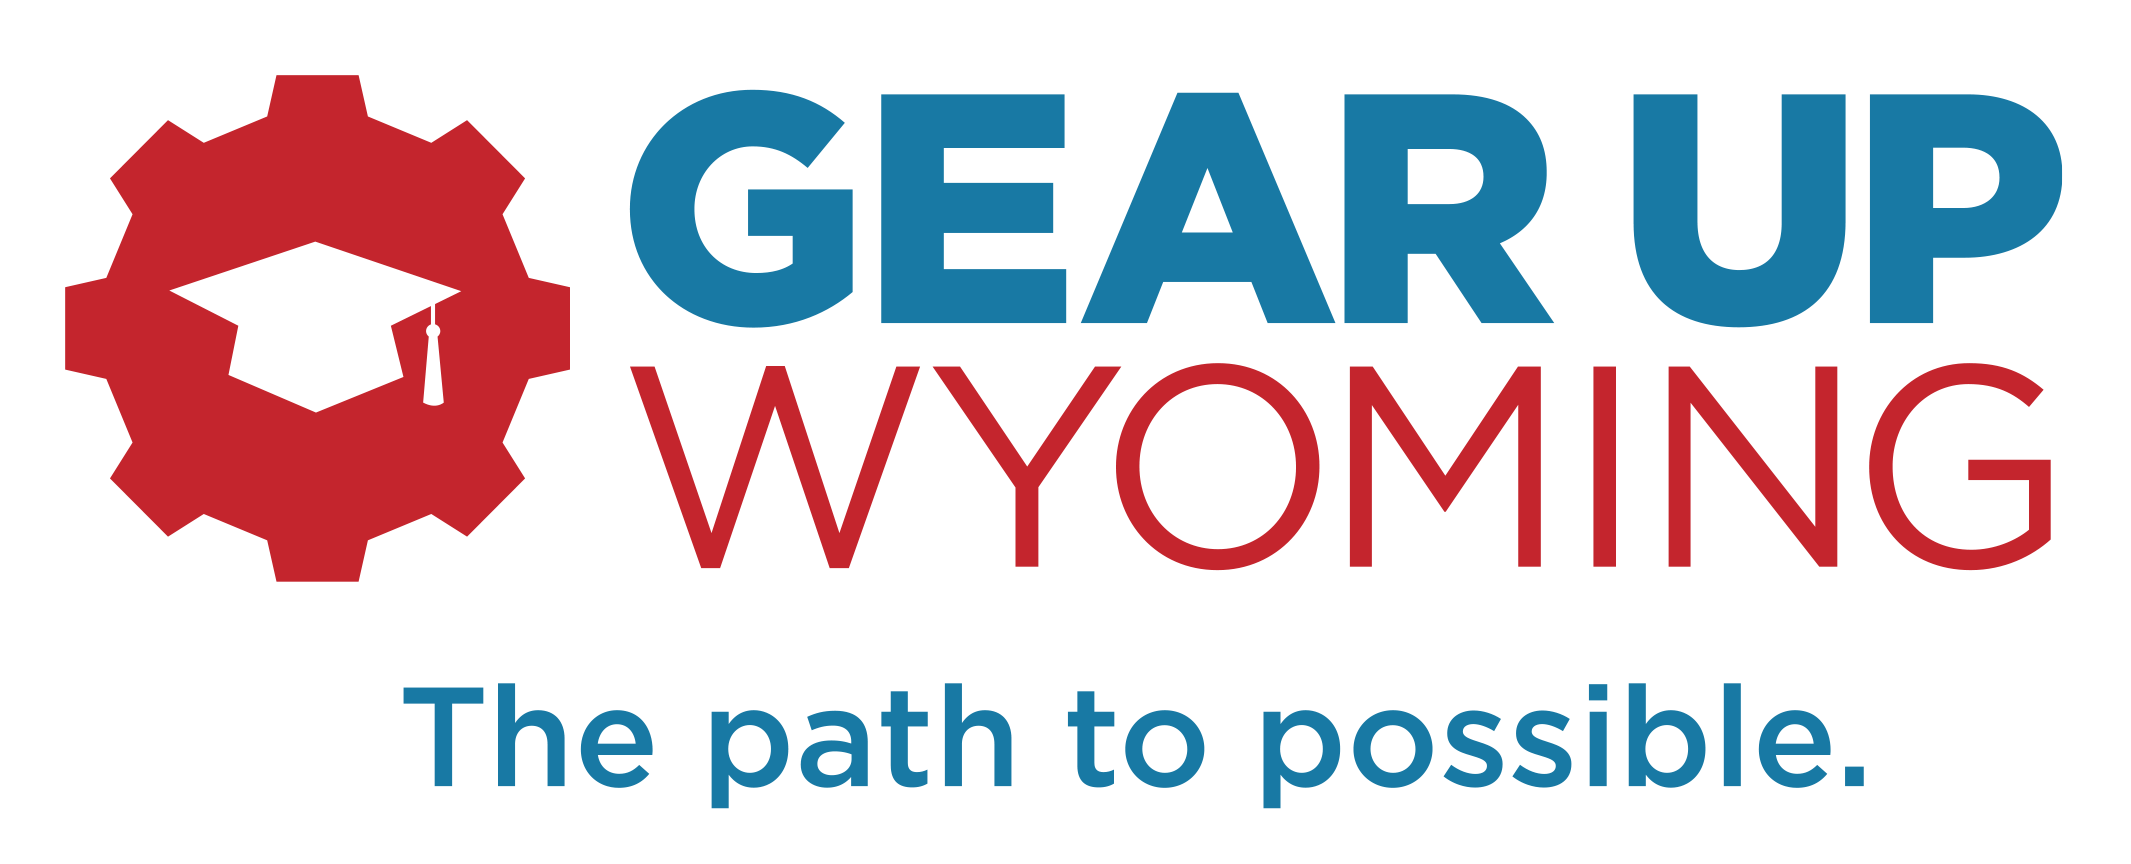 GEAR UP Wyoming NWCCD